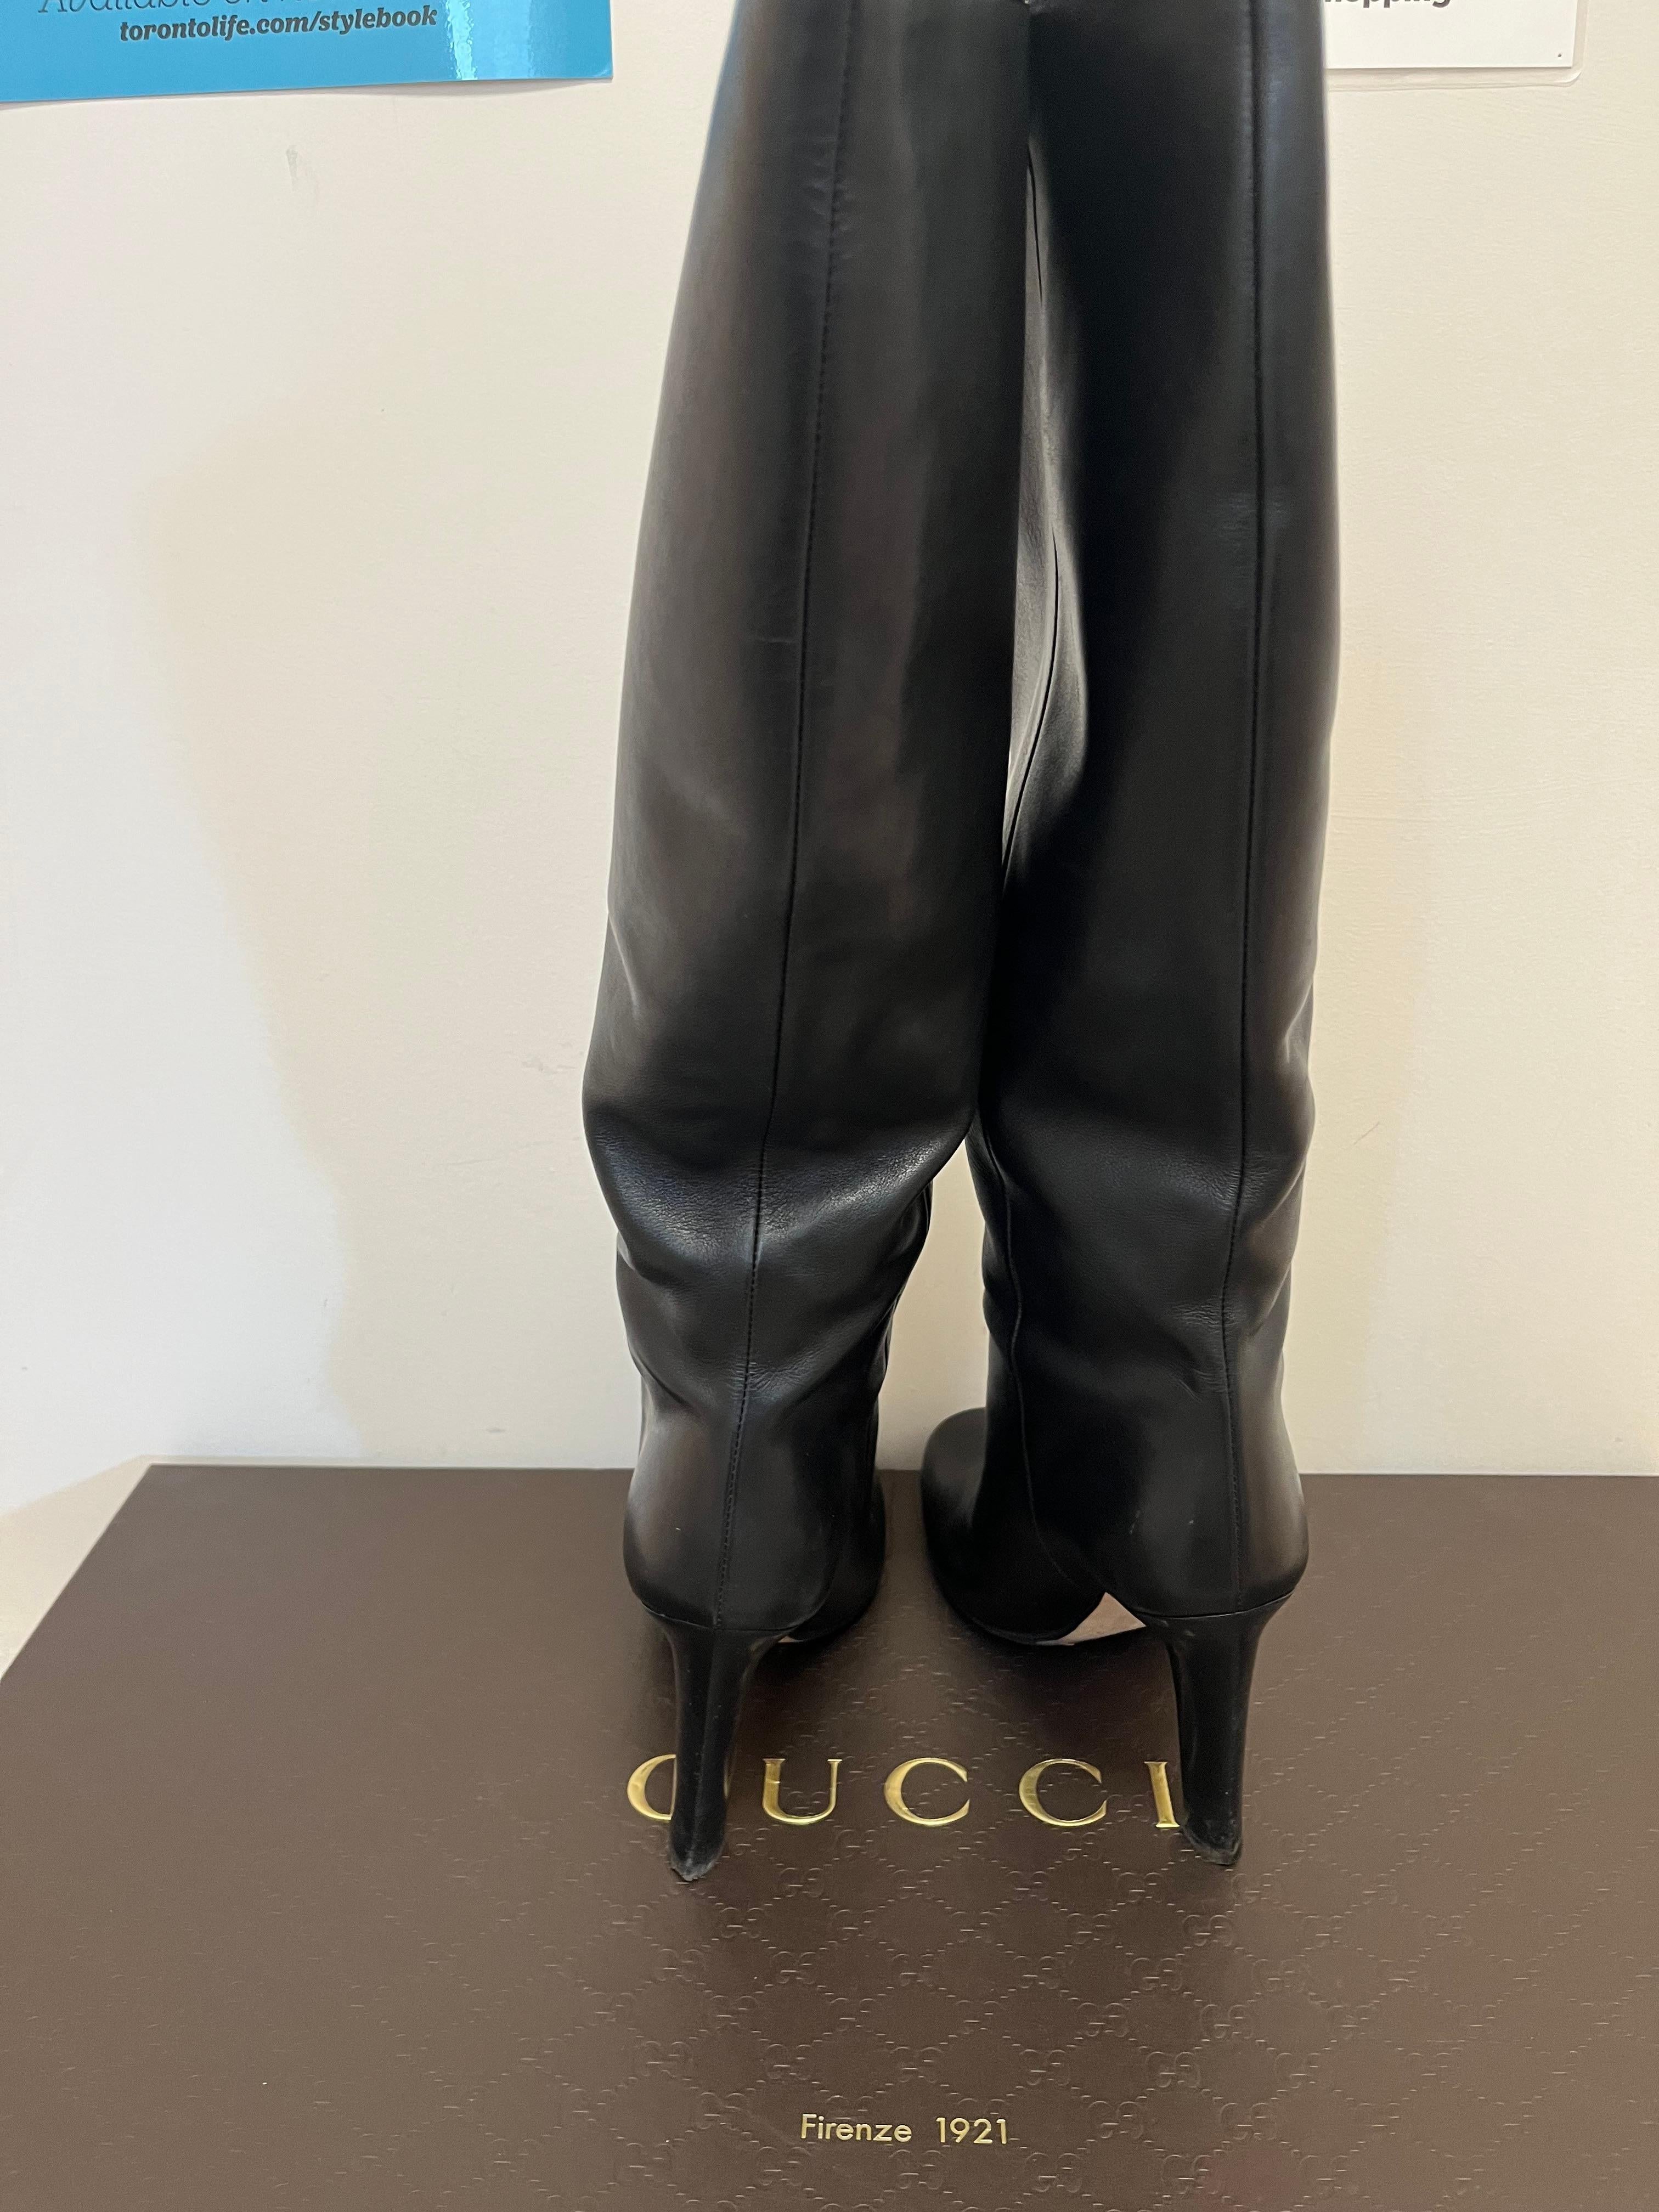 Women's Gucci Black Leather Knee-High Boots Size 7.5